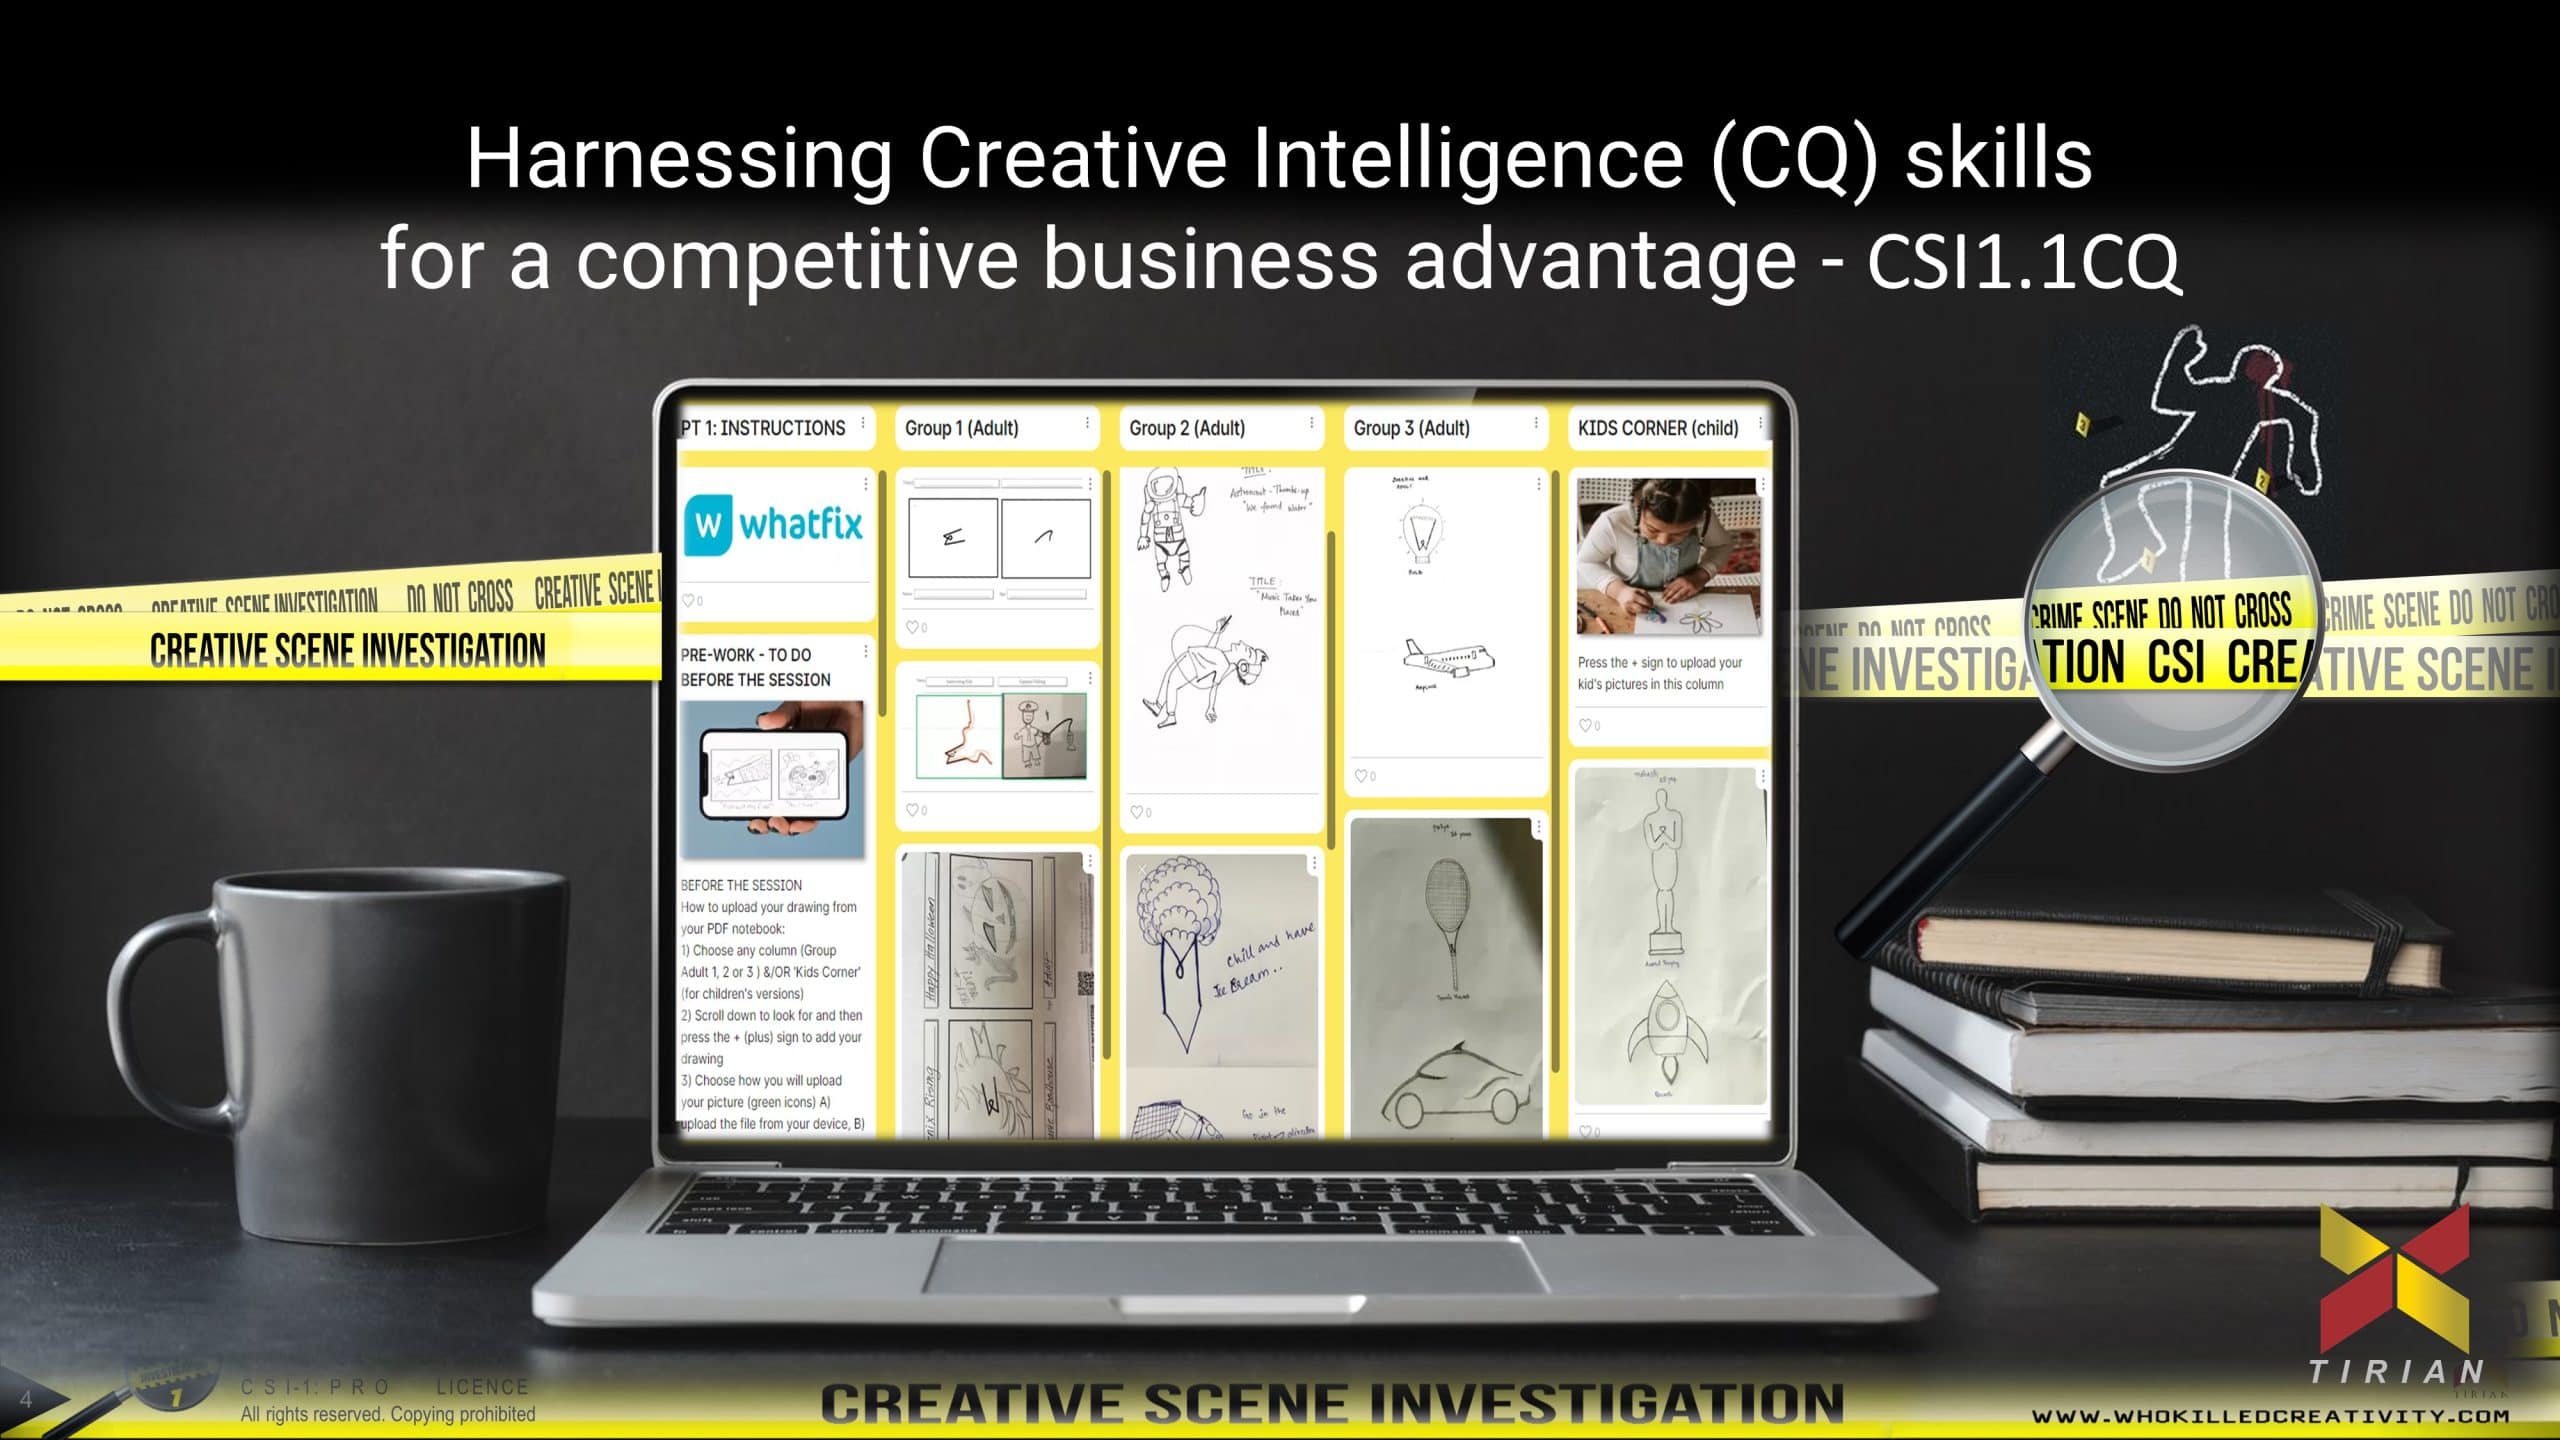 Harnessing Creative Intelligence (CQ) skills for a competitive business advantage